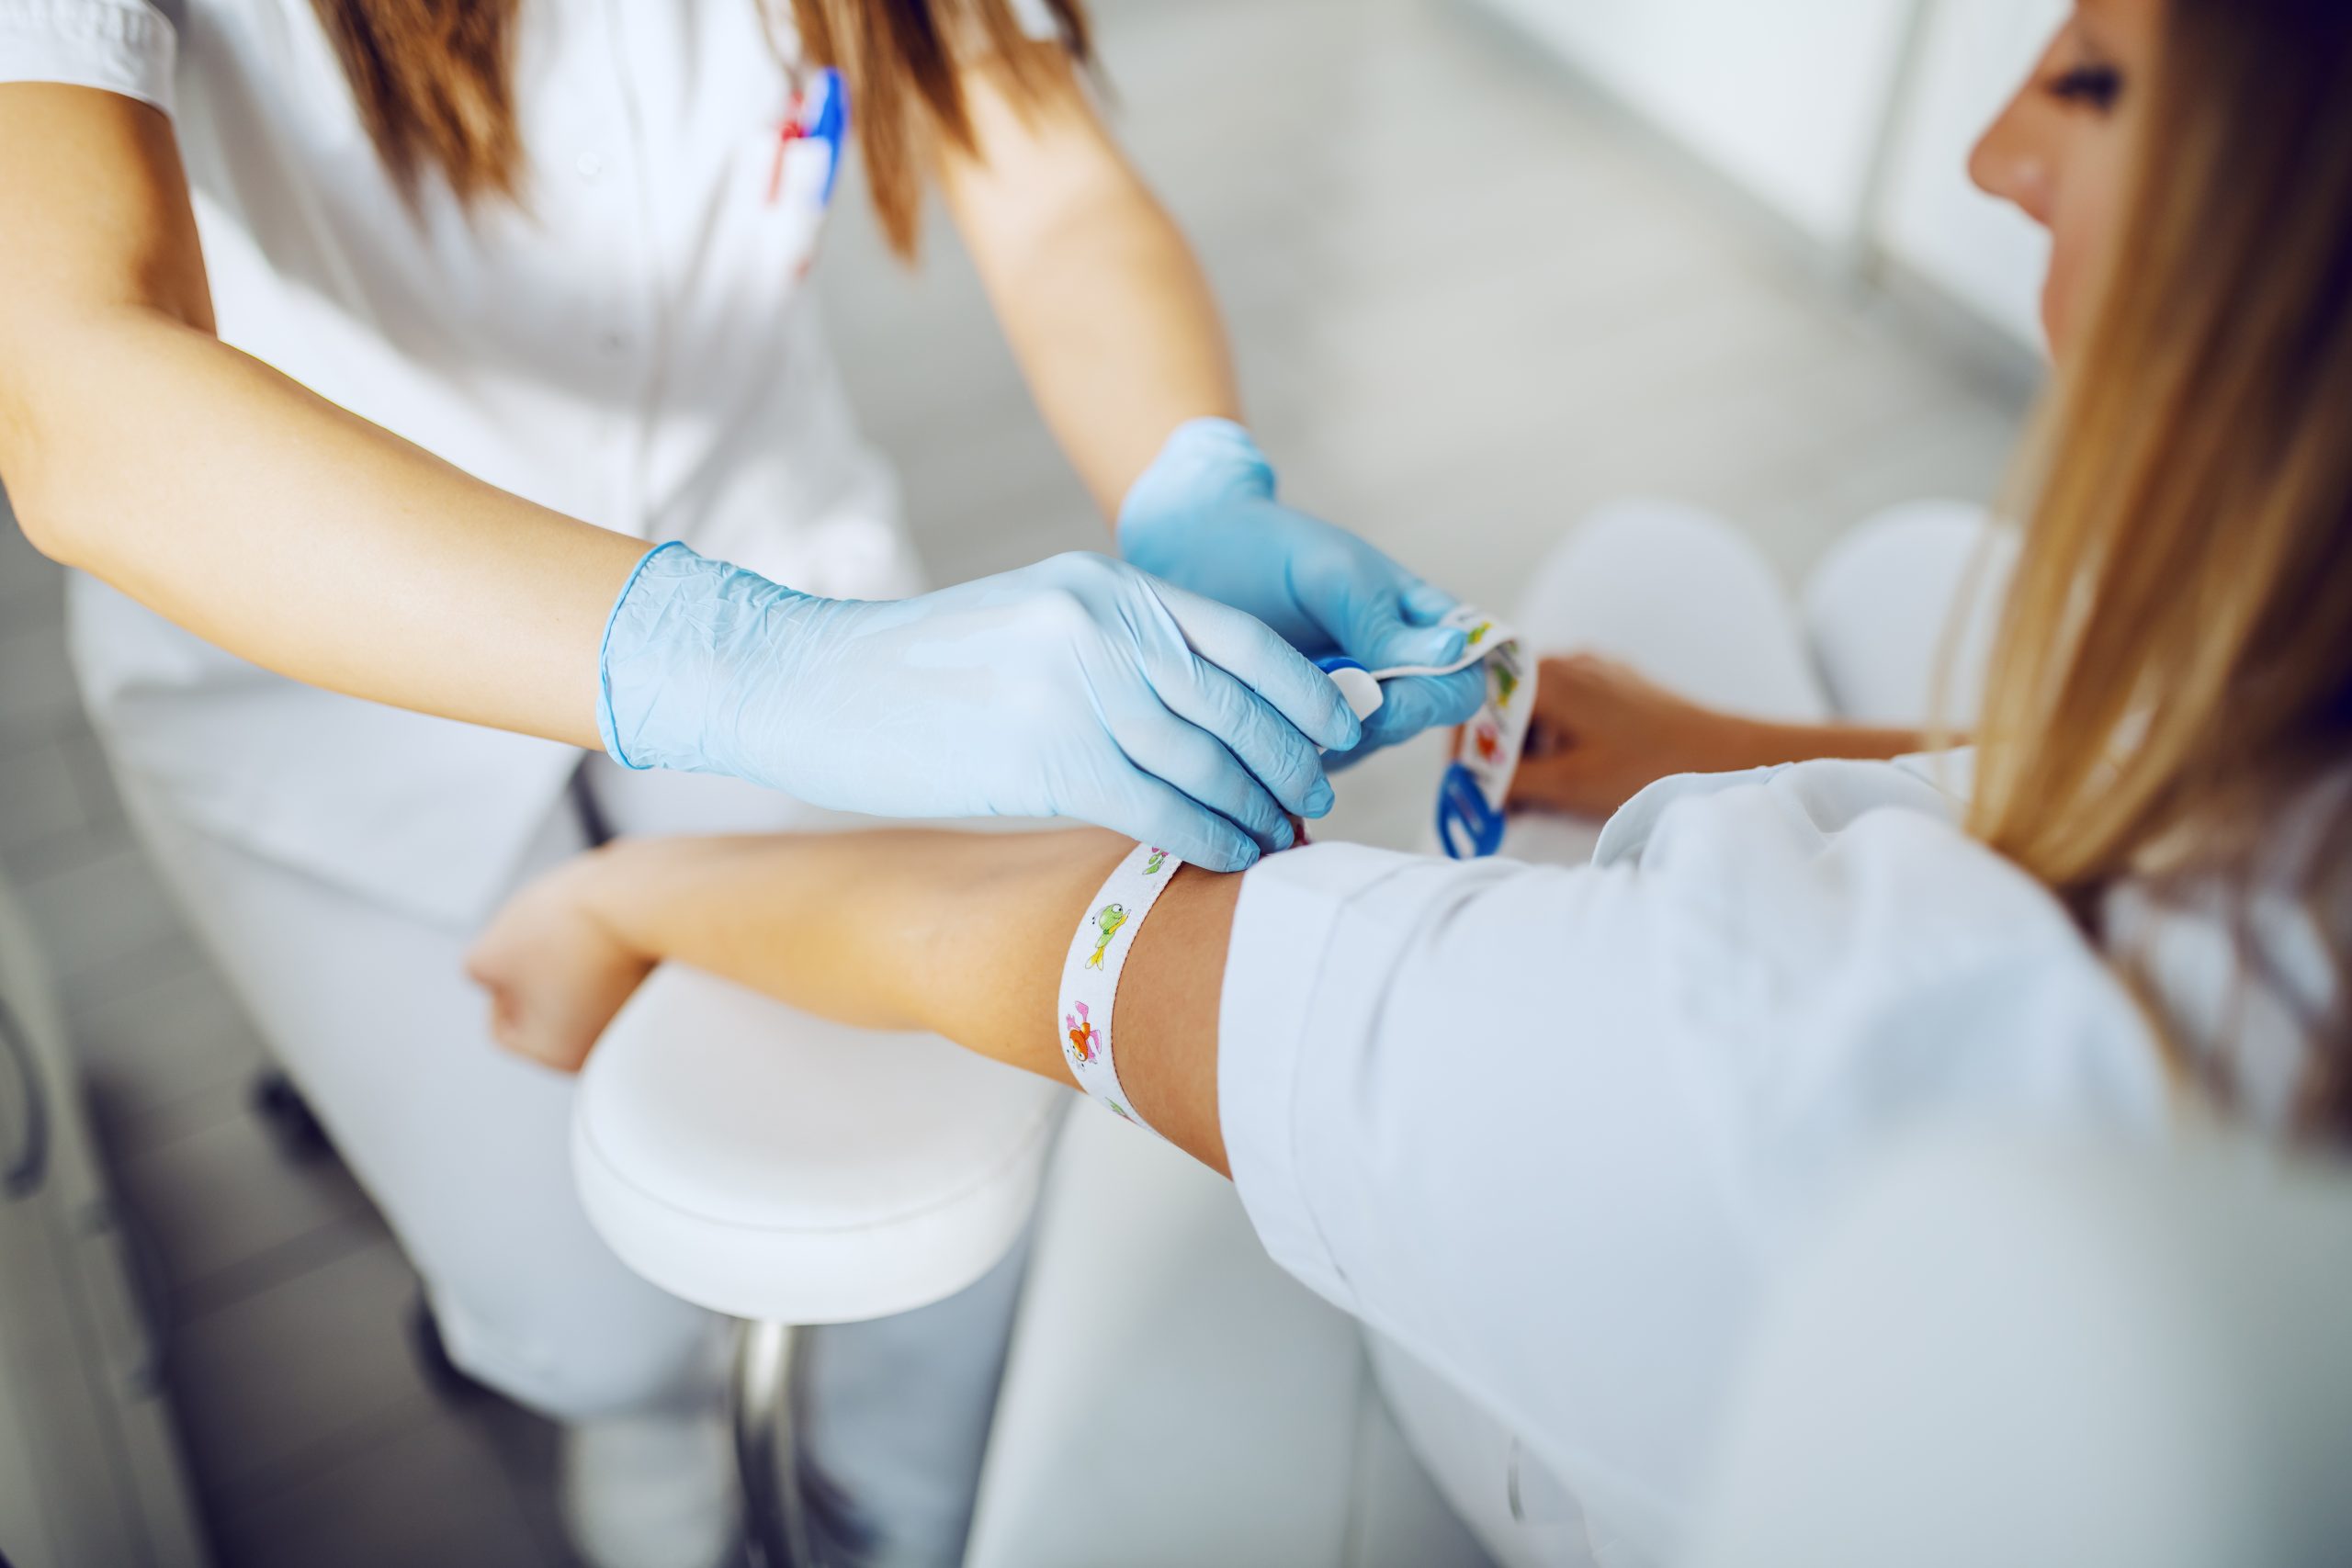 Cropped picture of lab assistant putting band on patient's arm and preparing for blood sampling.